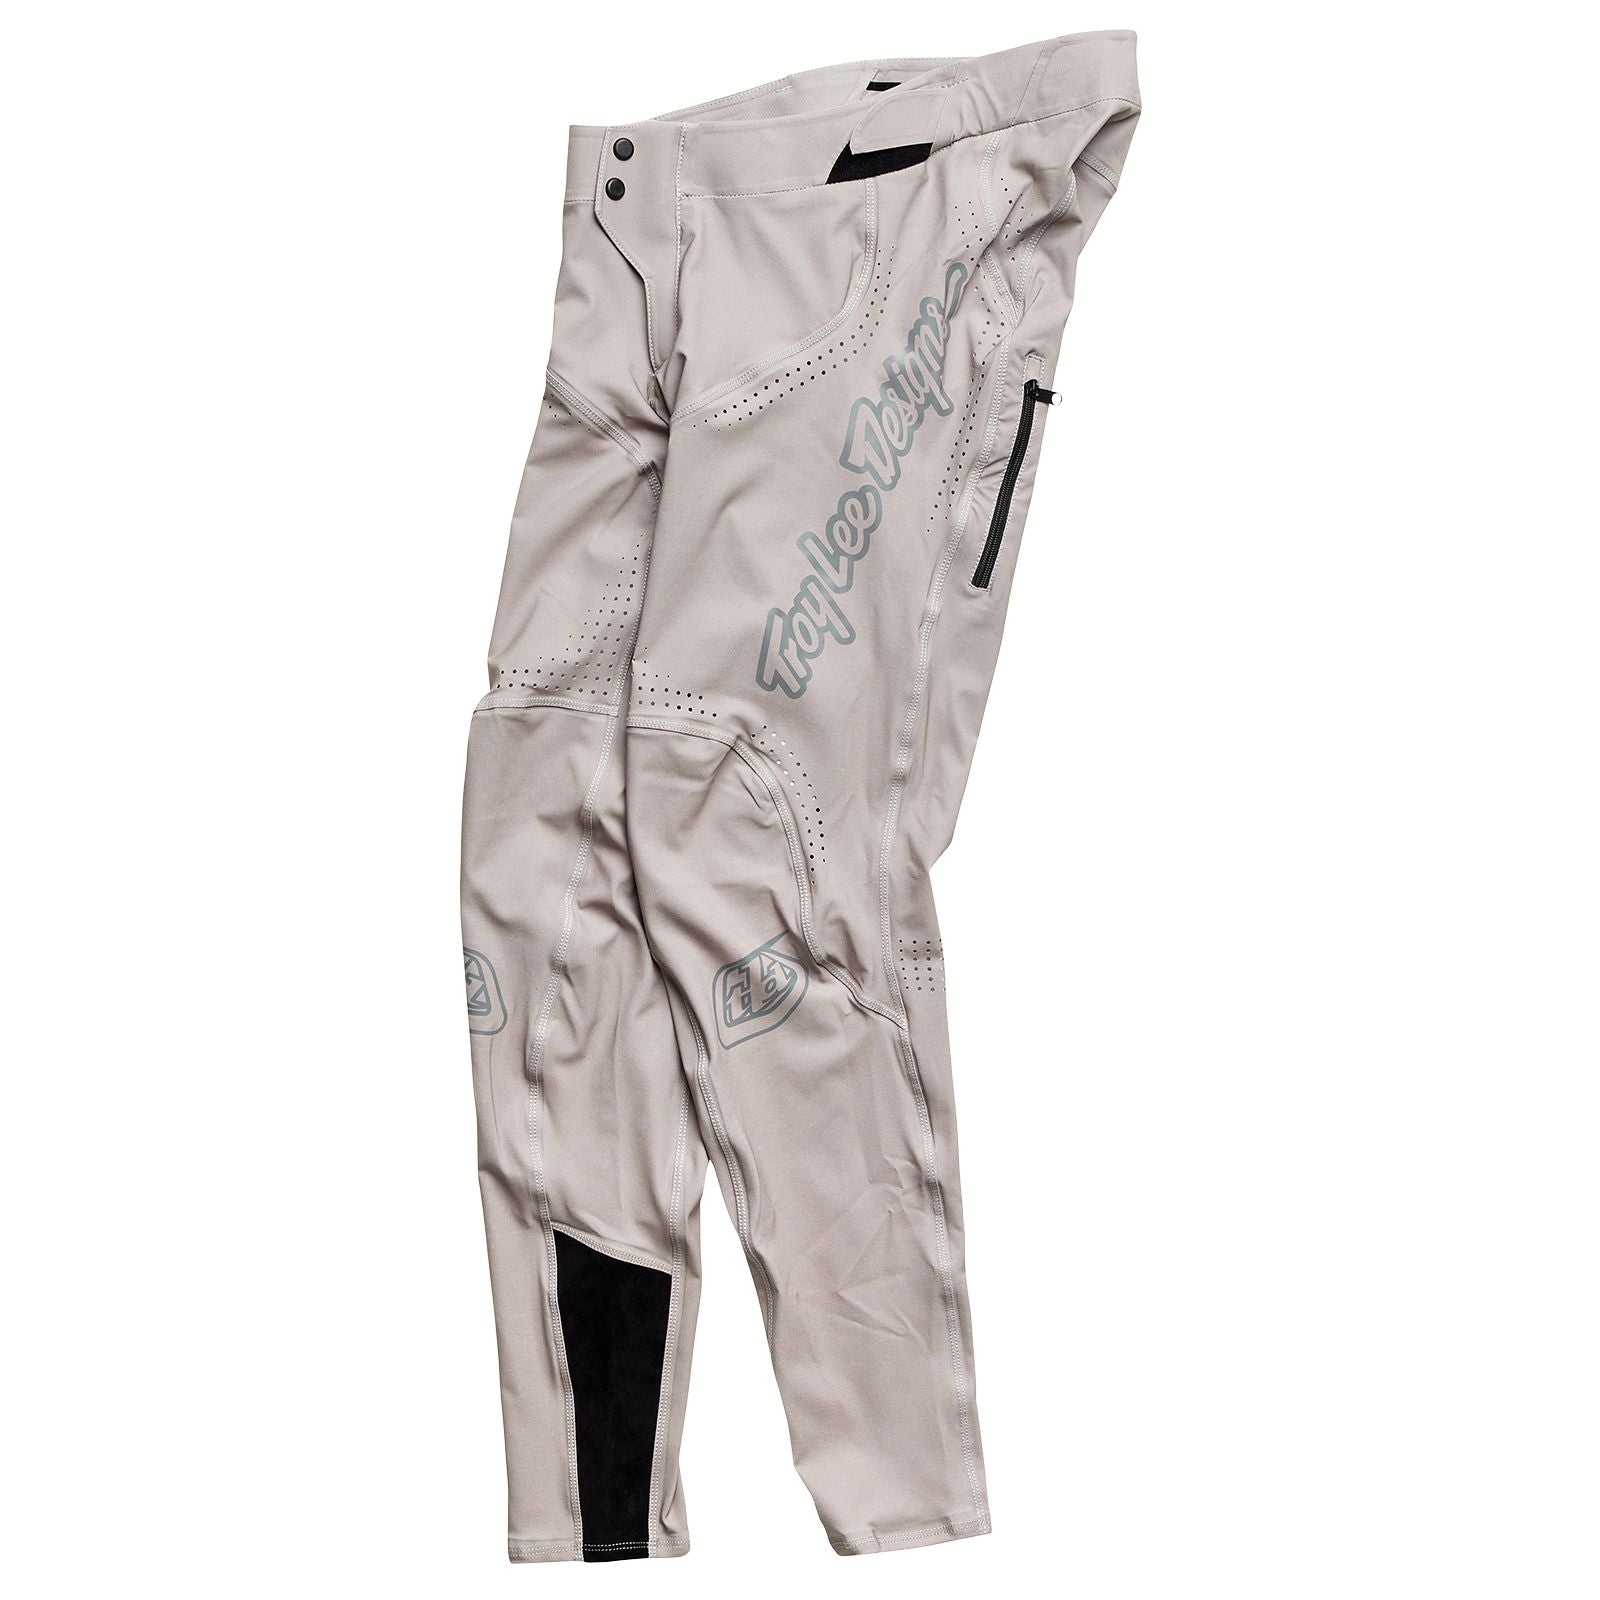 A TLD Sprint Ultra pant on a black background, featuring a lightweight design.